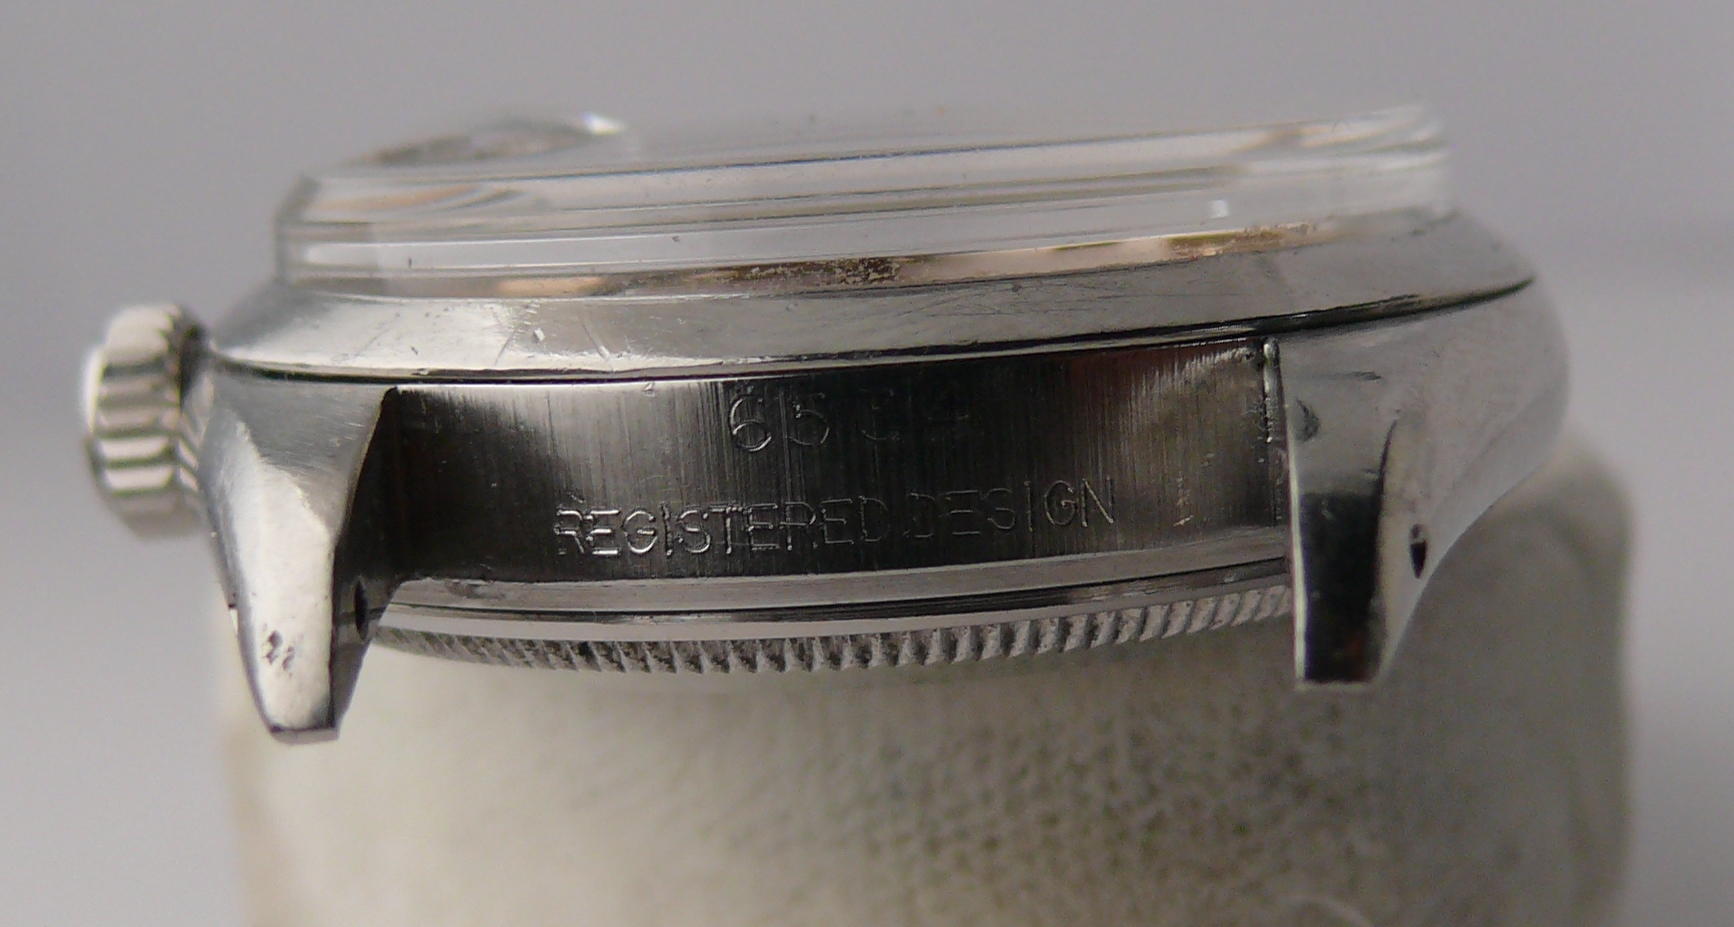 1958 Gents Rolex Oyster Perpetual Date Ref 6534, all original, serial & model numbers easily legible - Image 8 of 11